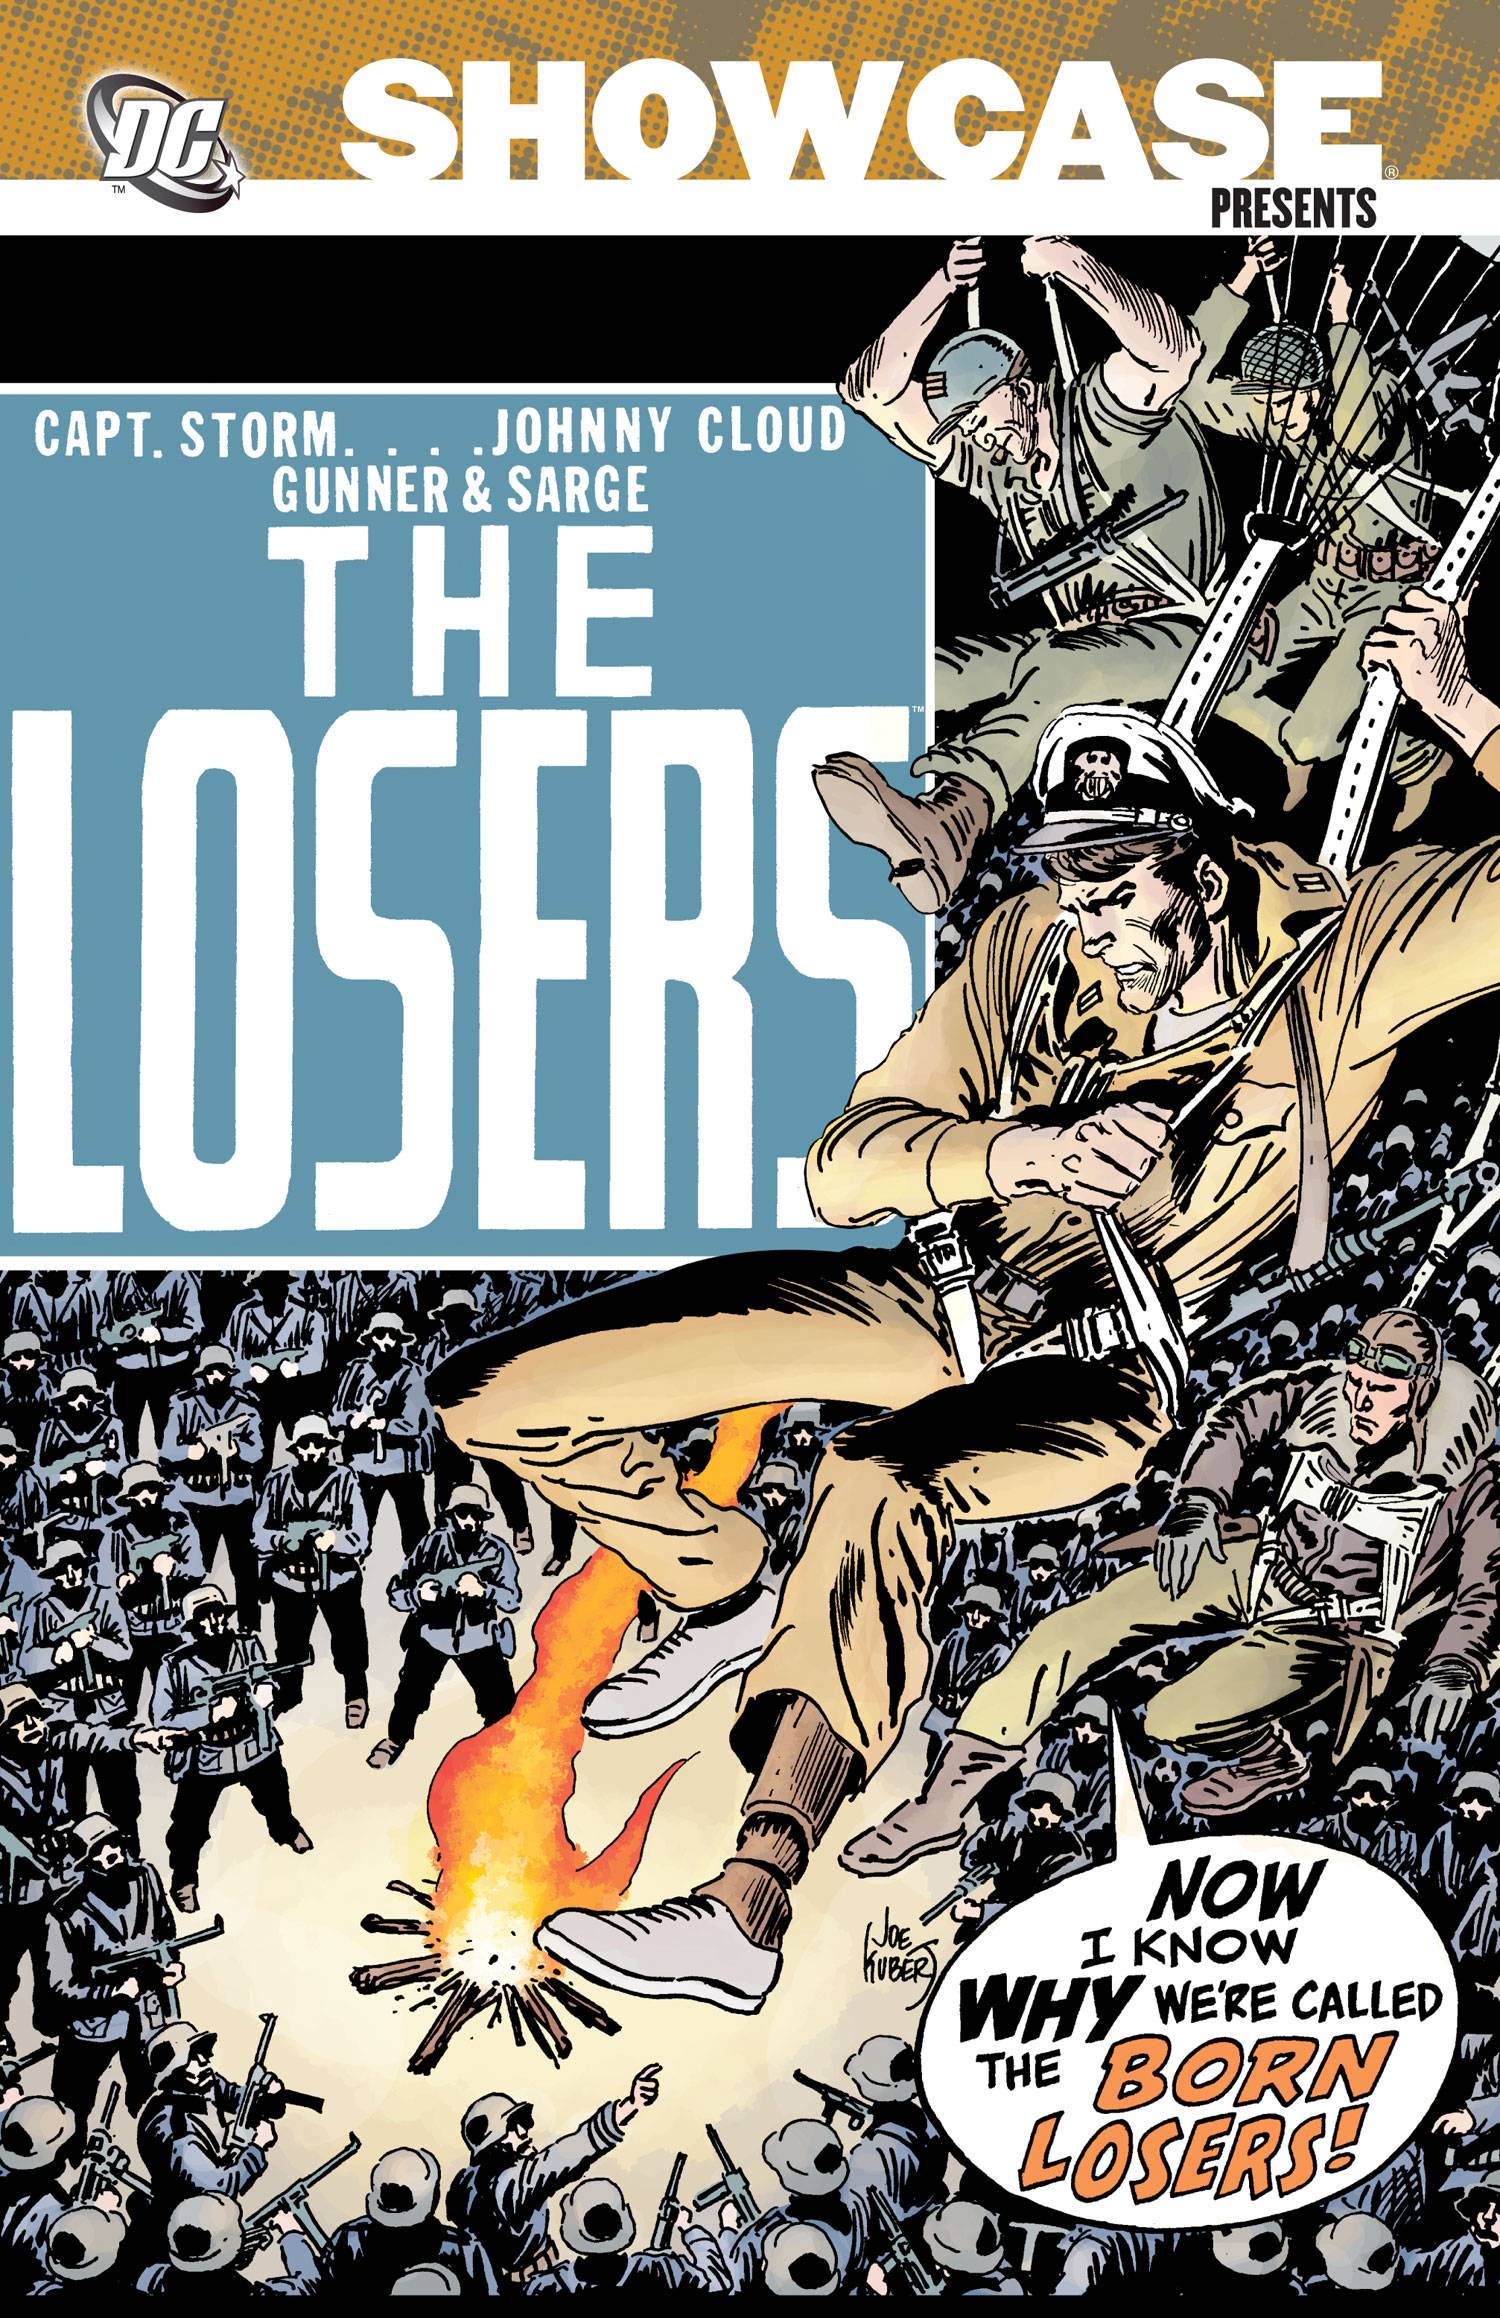 Showcase Presents The Losers Graphic Novel Volume 1